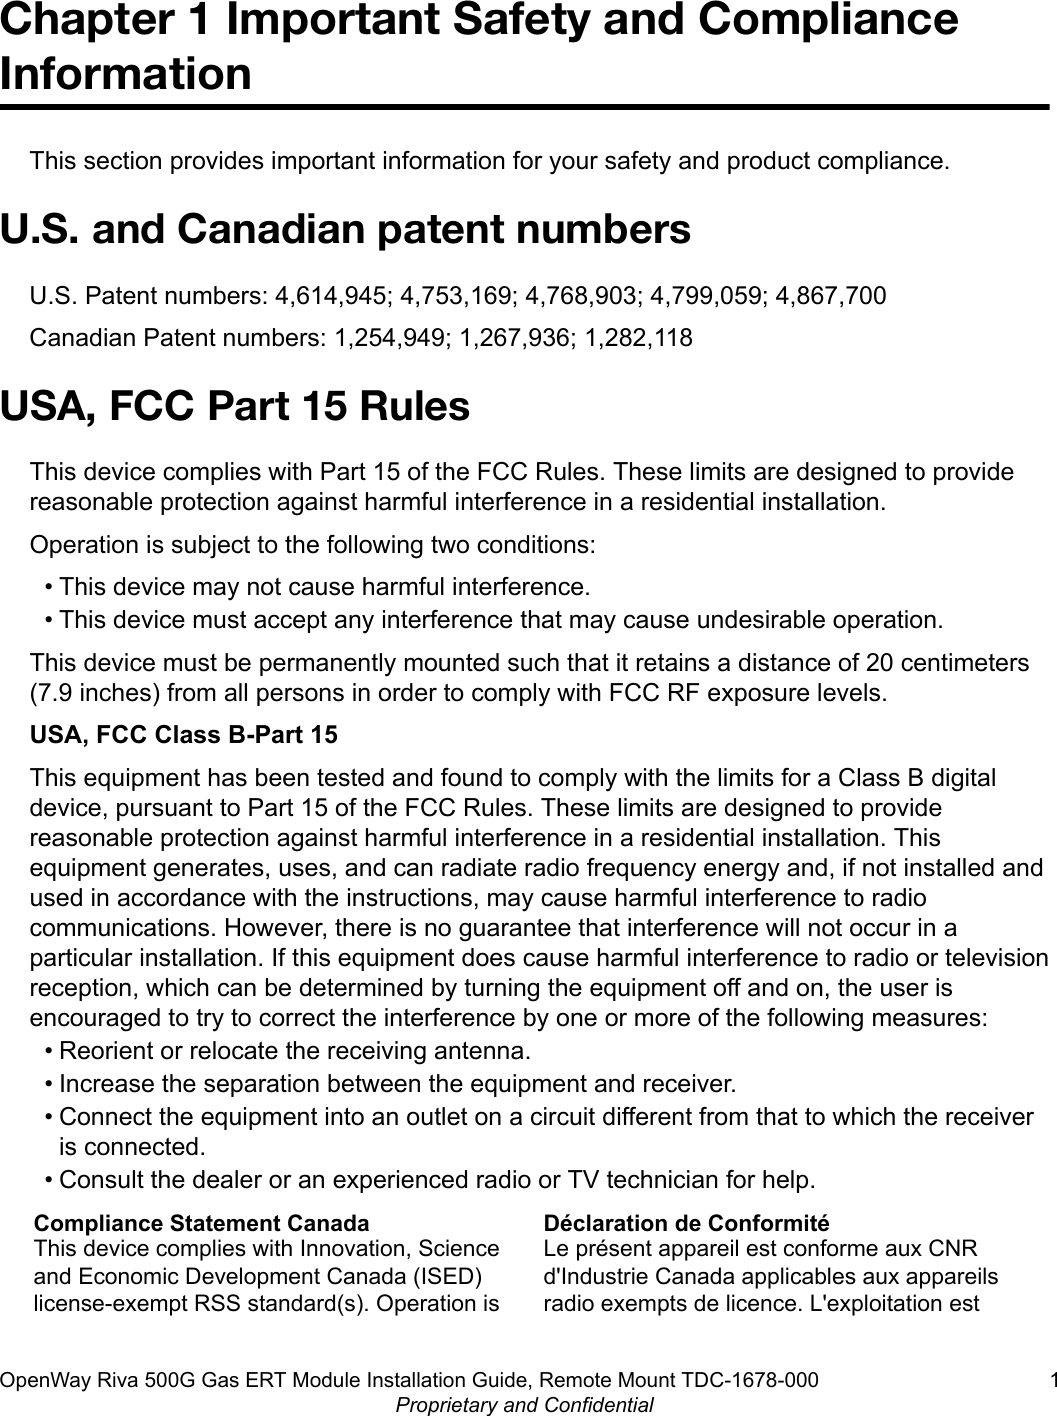 Chapter 1 Important Safety and ComplianceInformationThis section provides important information for your safety and product compliance.U.S. and Canadian patent numbersU.S. Patent numbers: 4,614,945; 4,753,169; 4,768,903; 4,799,059; 4,867,700Canadian Patent numbers: 1,254,949; 1,267,936; 1,282,118USA, FCC Part 15 RulesThis device complies with Part 15 of the FCC Rules. These limits are designed to providereasonable protection against harmful interference in a residential installation.Operation is subject to the following two conditions:• This device may not cause harmful interference.• This device must accept any interference that may cause undesirable operation.This device must be permanently mounted such that it retains a distance of 20 centimeters(7.9 inches) from all persons in order to comply with FCC RF exposure levels.USA, FCC Class B-Part 15This equipment has been tested and found to comply with the limits for a Class B digitaldevice, pursuant to Part 15 of the FCC Rules. These limits are designed to providereasonable protection against harmful interference in a residential installation. Thisequipment generates, uses, and can radiate radio frequency energy and, if not installed andused in accordance with the instructions, may cause harmful interference to radiocommunications. However, there is no guarantee that interference will not occur in aparticular installation. If this equipment does cause harmful interference to radio or televisionreception, which can be determined by turning the equipment off and on, the user isencouraged to try to correct the interference by one or more of the following measures:• Reorient or relocate the receiving antenna.• Increase the separation between the equipment and receiver.• Connect the equipment into an outlet on a circuit different from that to which the receiveris connected.• Consult the dealer or an experienced radio or TV technician for help.Compliance Statement CanadaThis device complies with Innovation, Scienceand Economic Development Canada (ISED)license-exempt RSS standard(s). Operation isDéclaration de ConformitéLe présent appareil est conforme aux CNRd&apos;Industrie Canada applicables aux appareilsradio exempts de licence. L&apos;exploitation estOpenWay Riva 500G Gas ERT Module Installation Guide, Remote Mount TDC-1678-000 1Proprietary and Confidential